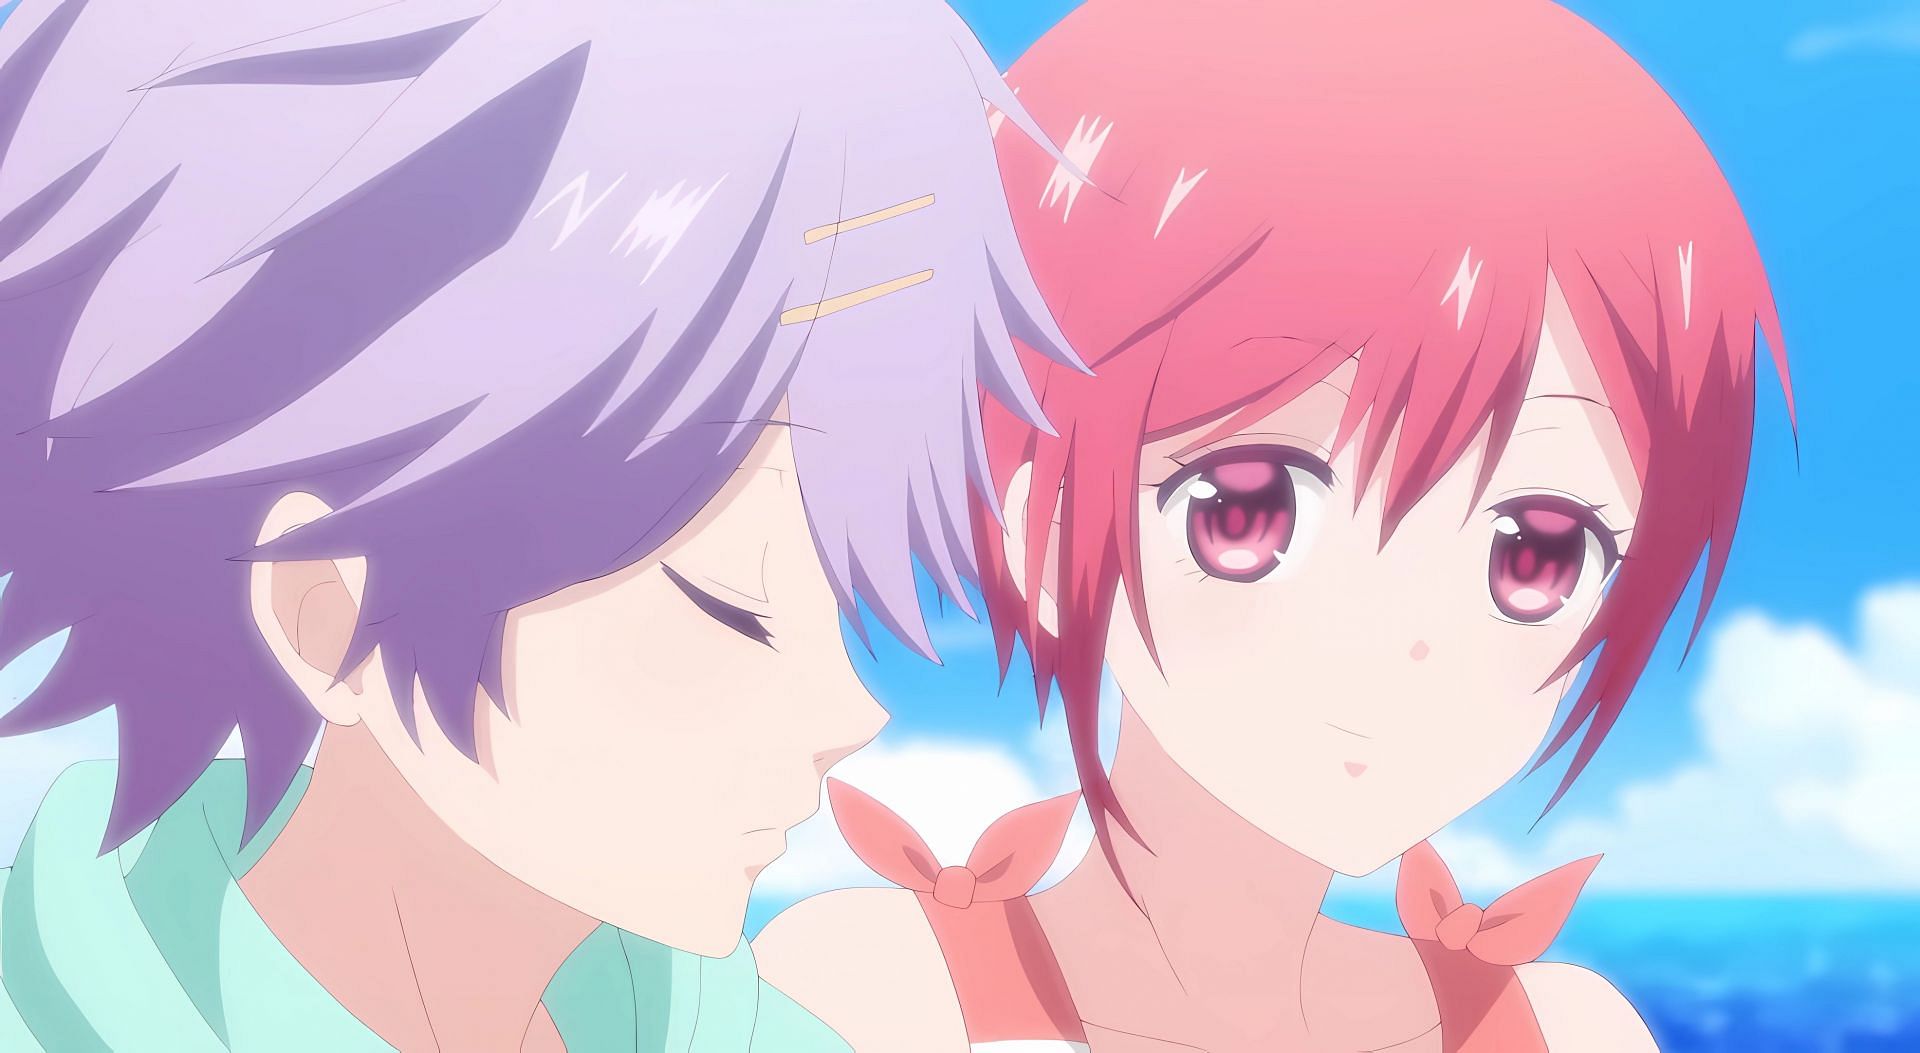 Juri (left) and Mito (right) as seen in the anime (Image via Studio Blanc)